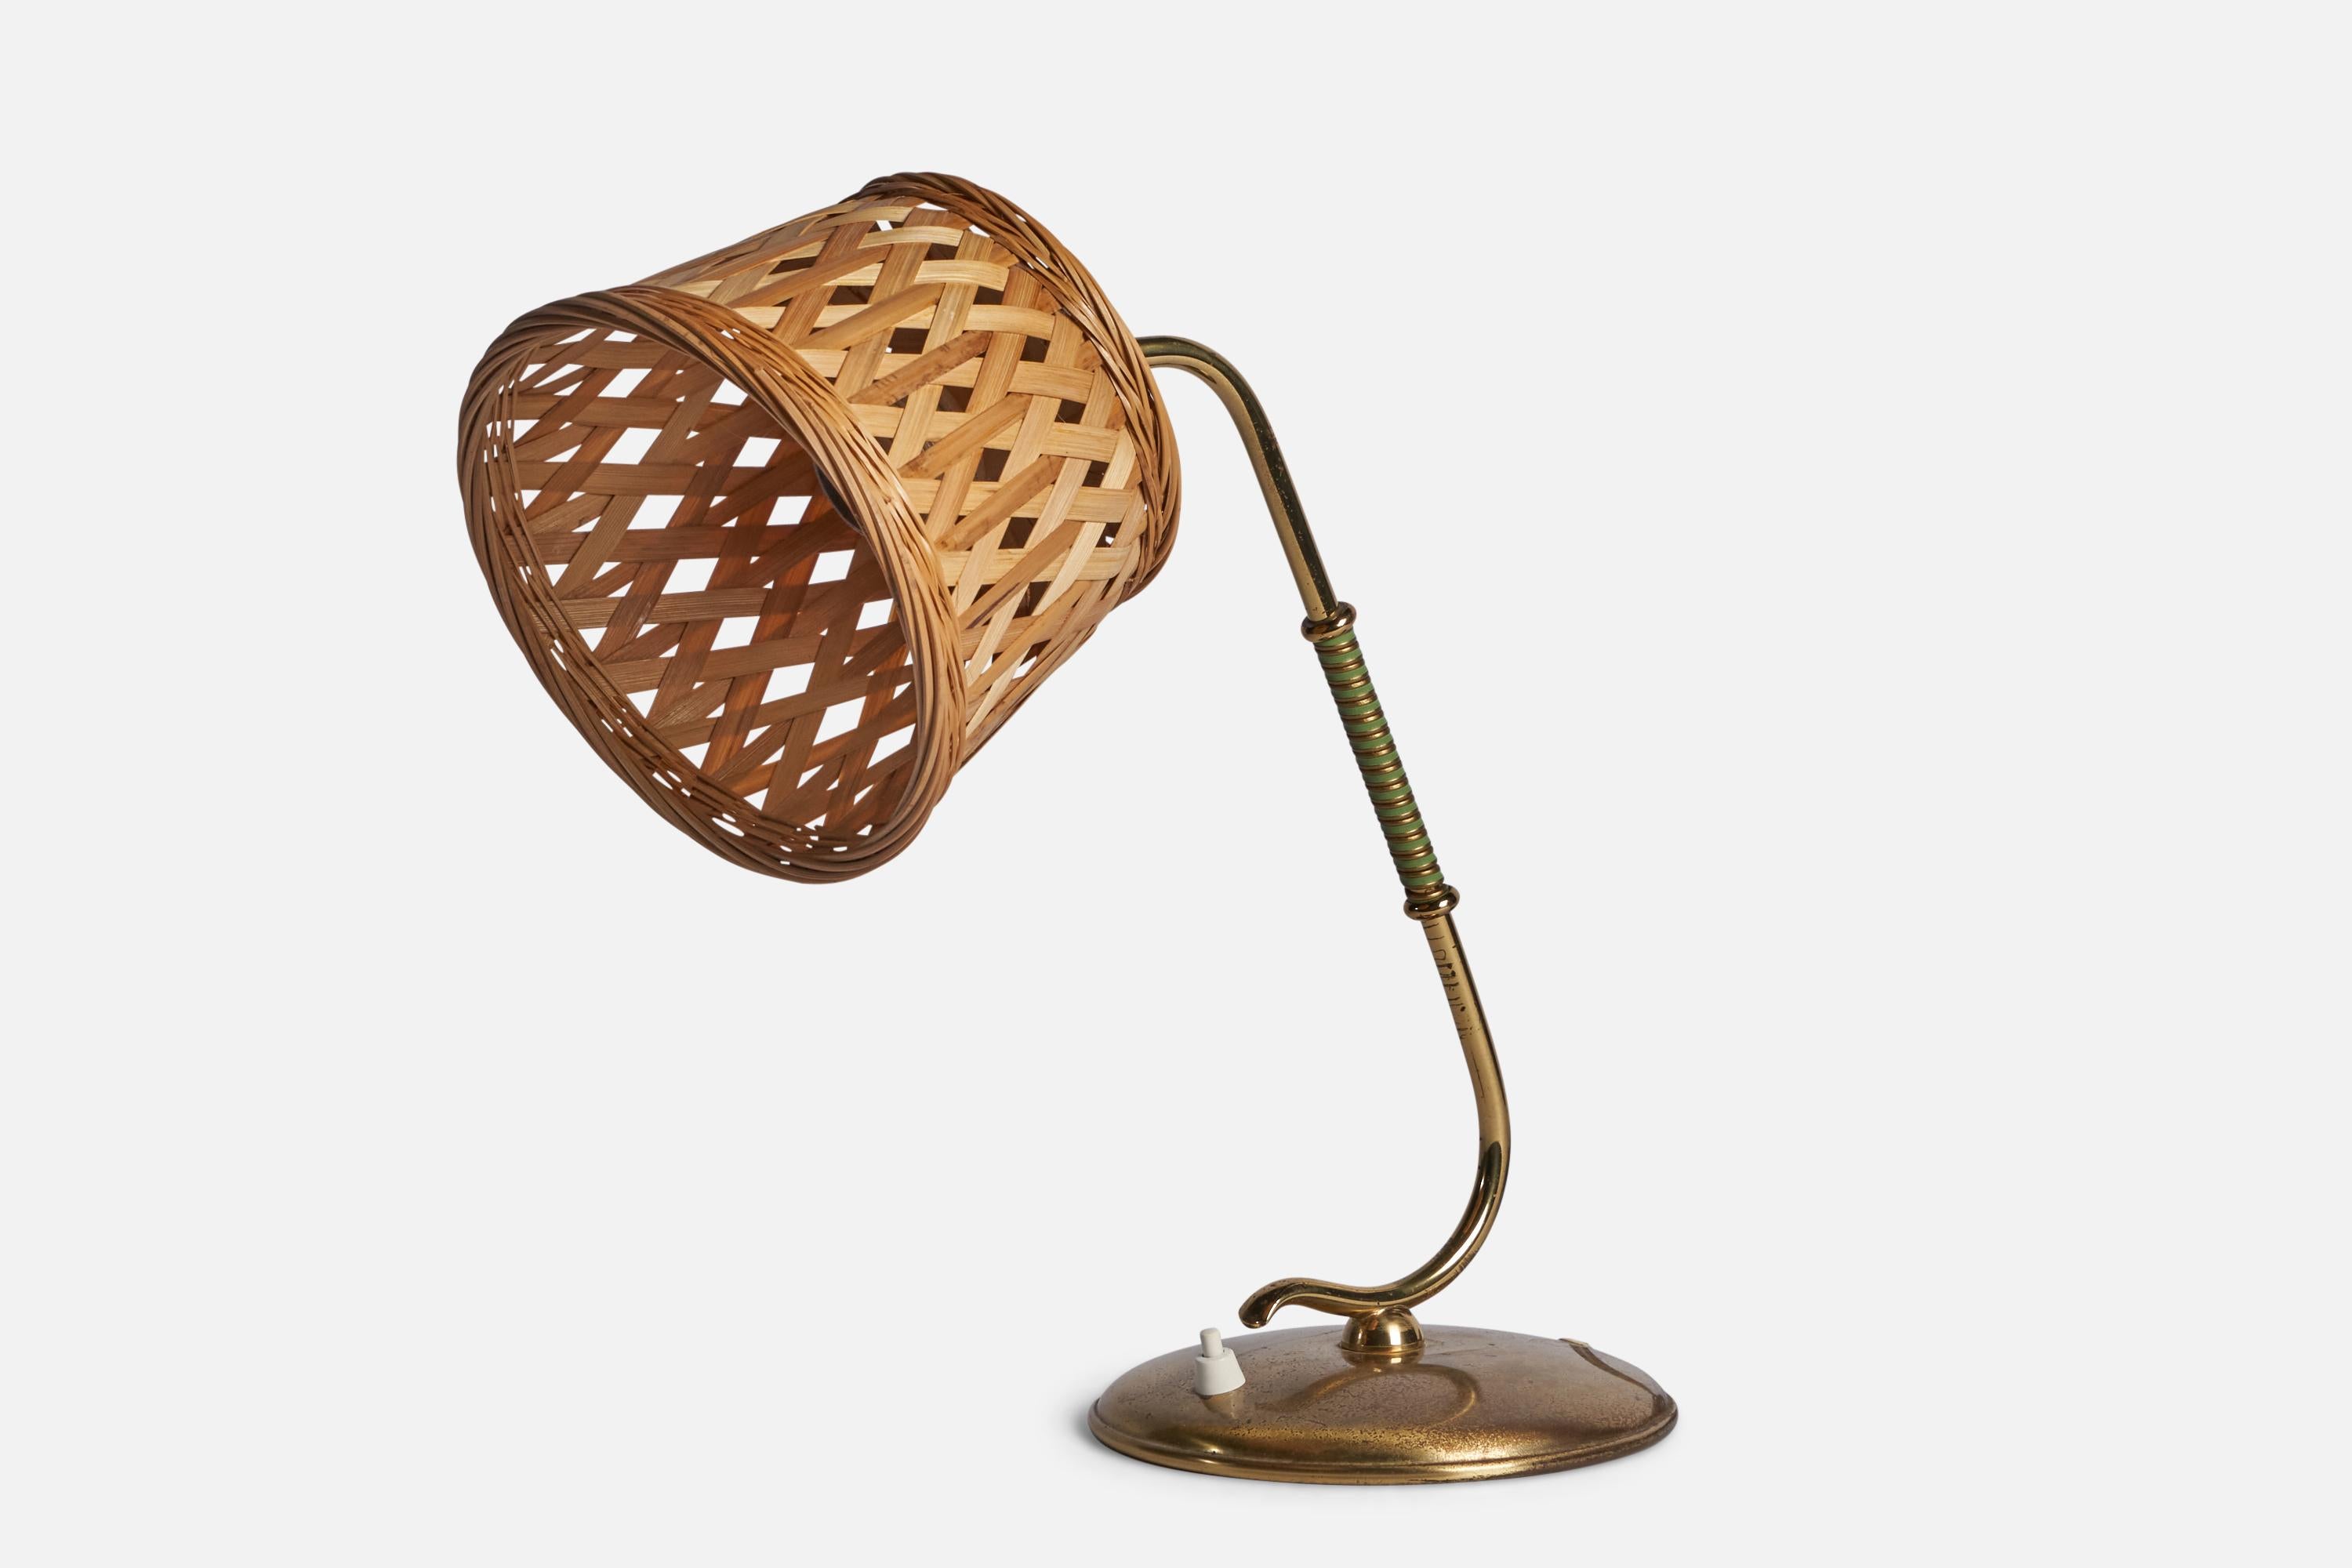 An adjustable brass and rattan table lamp designed and produced by Valinte OY, Finland, c. 1940s.
Overall Dimensions (inches): 13.4